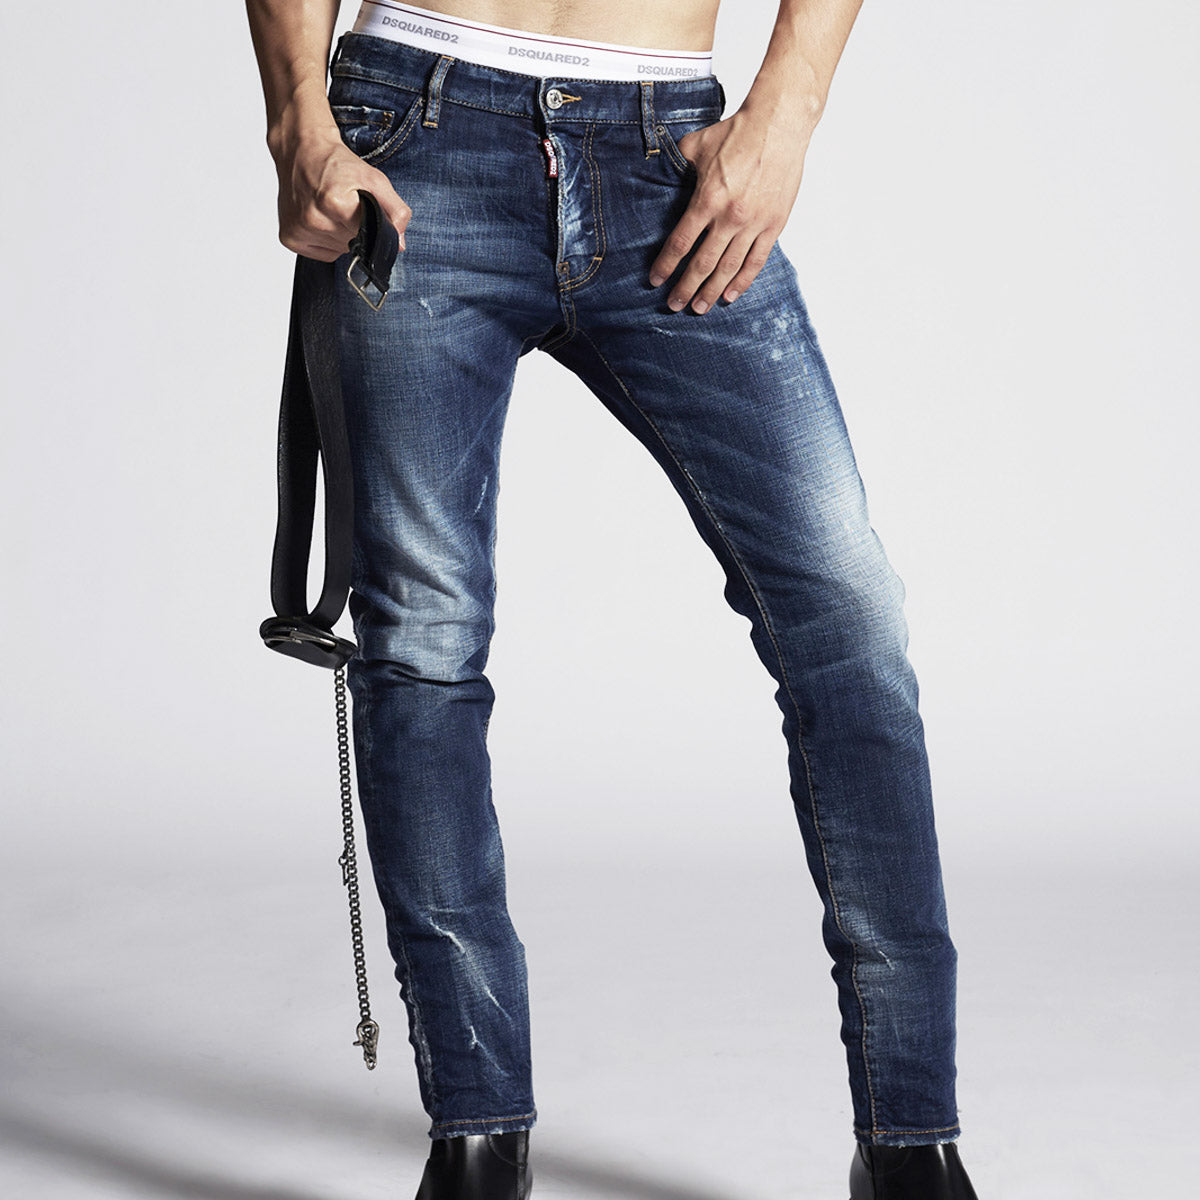 DSQUARED2 - Dark 4 Wash Cool Guy Jeans in Blue | Nigel Clare